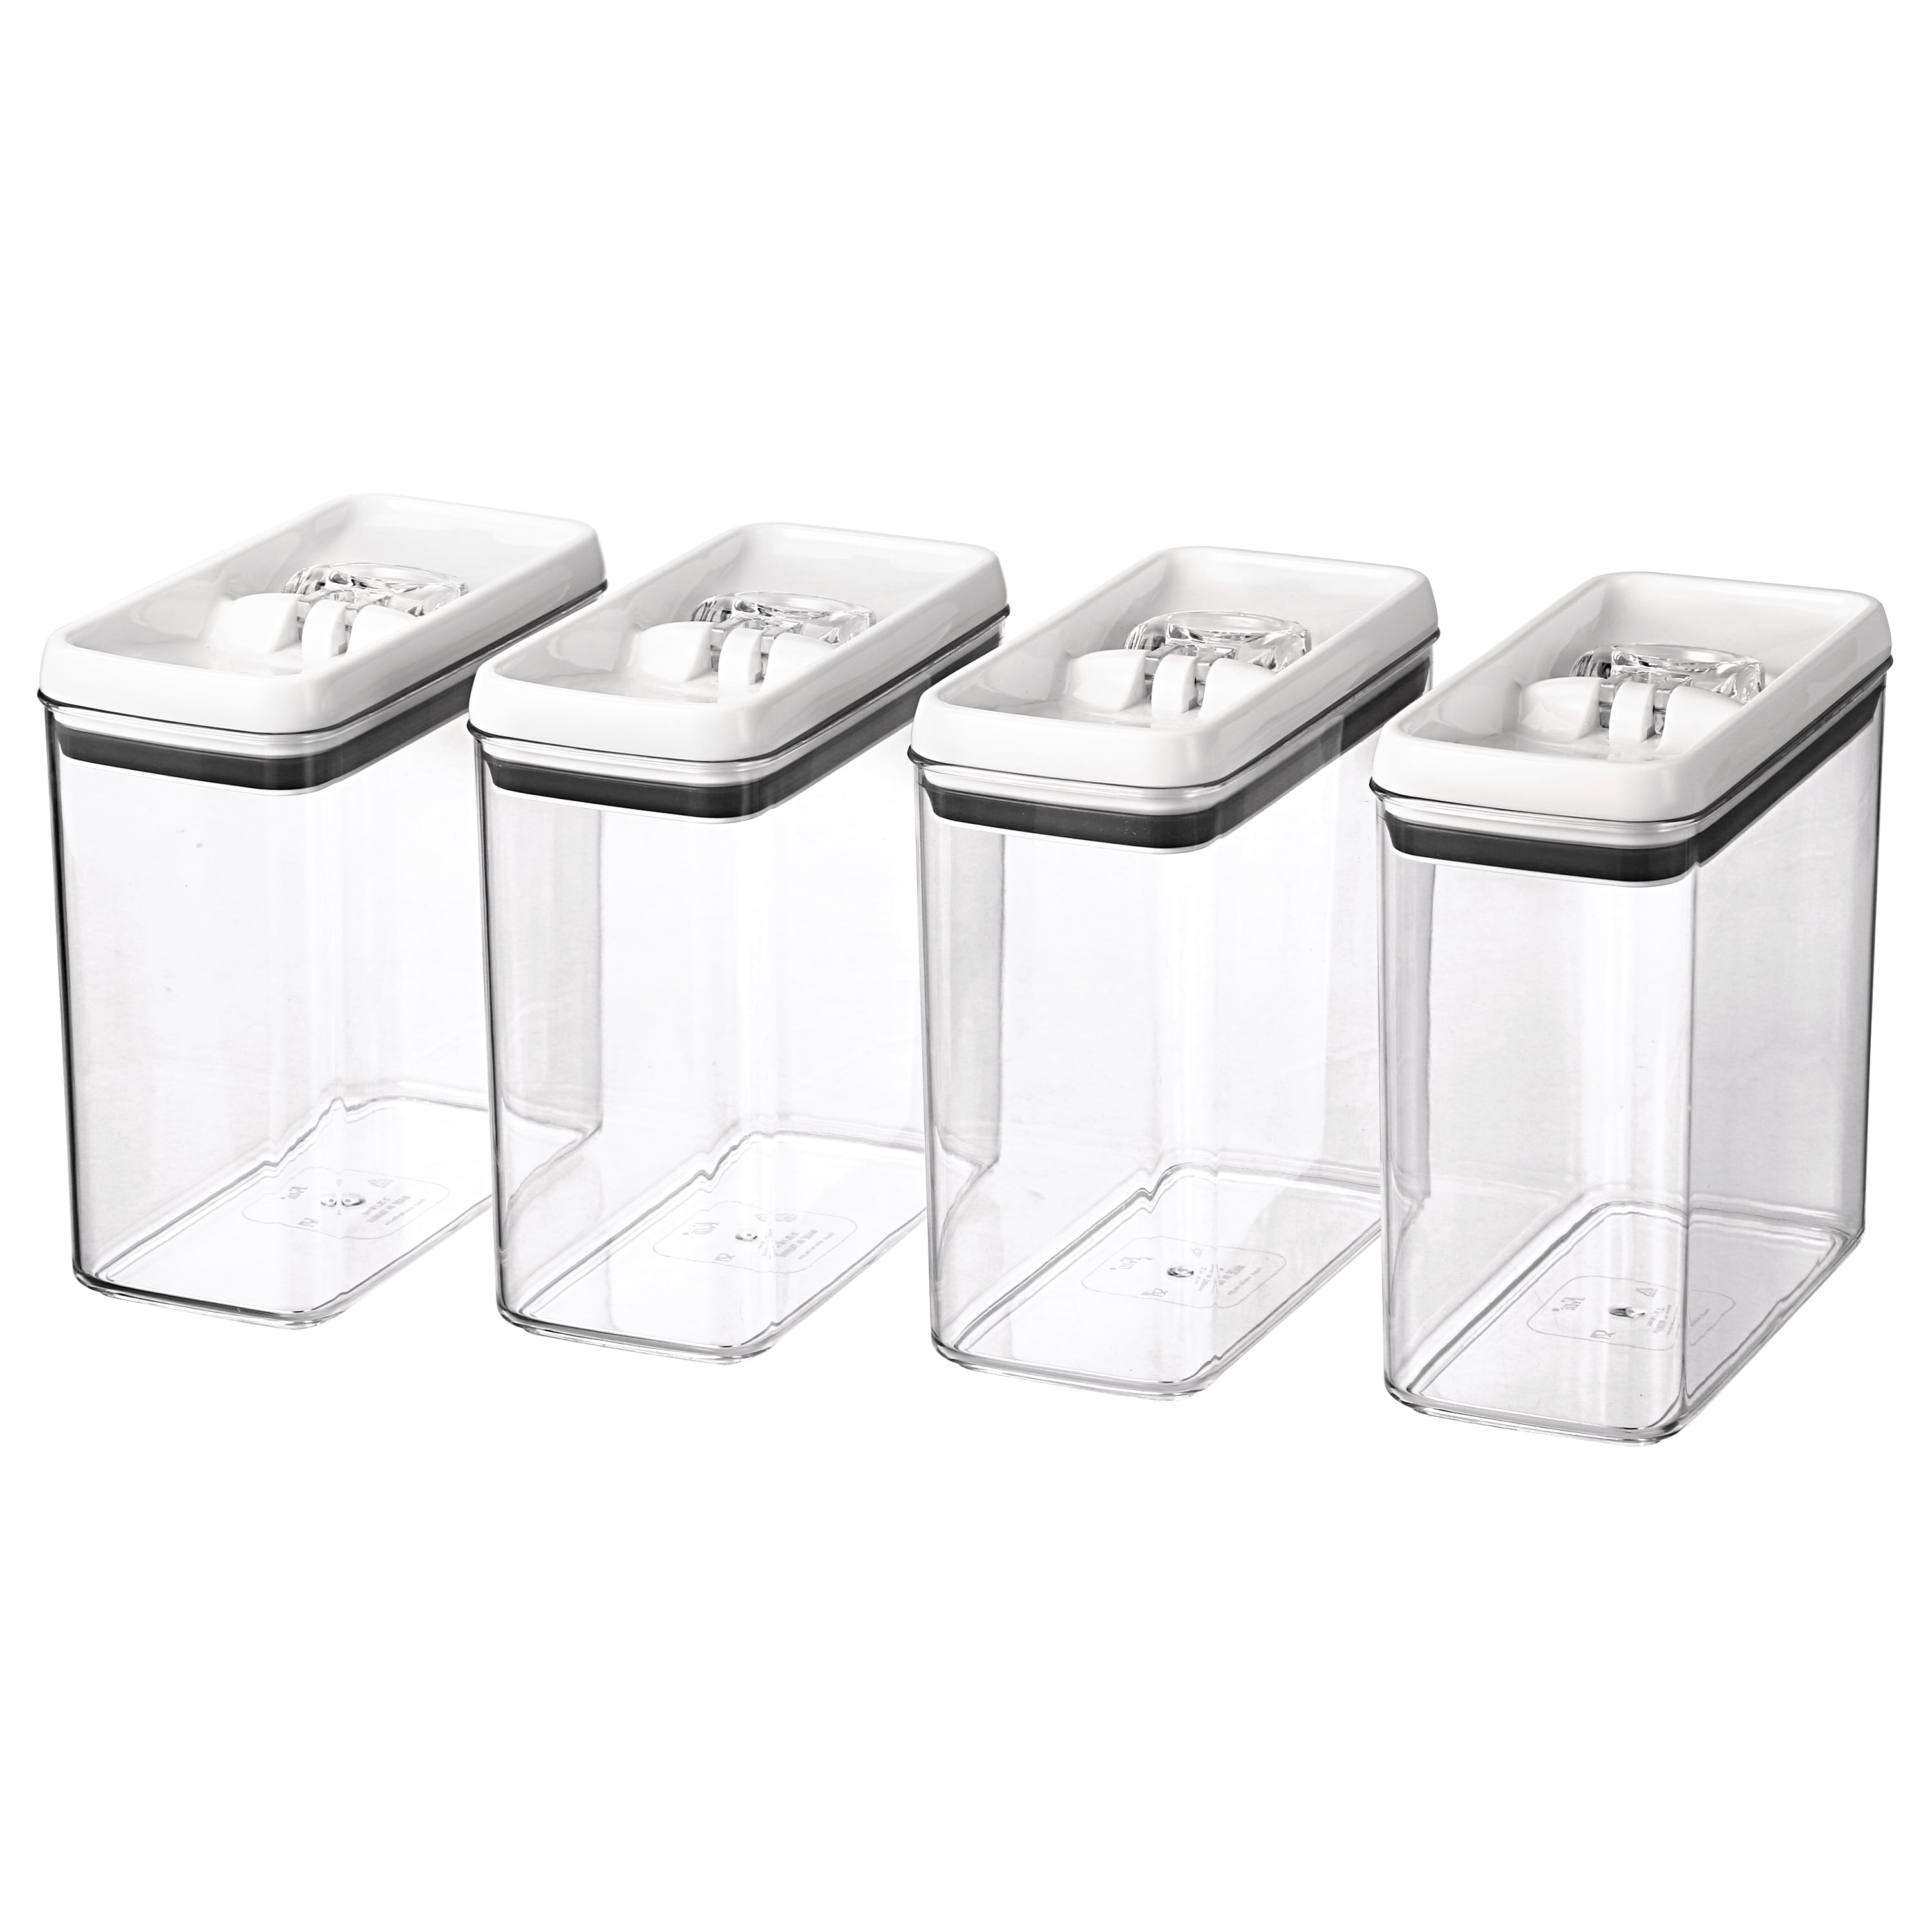 Better Homes & Gardens Flip-Tite Square Container, 6.5 Cups - Set